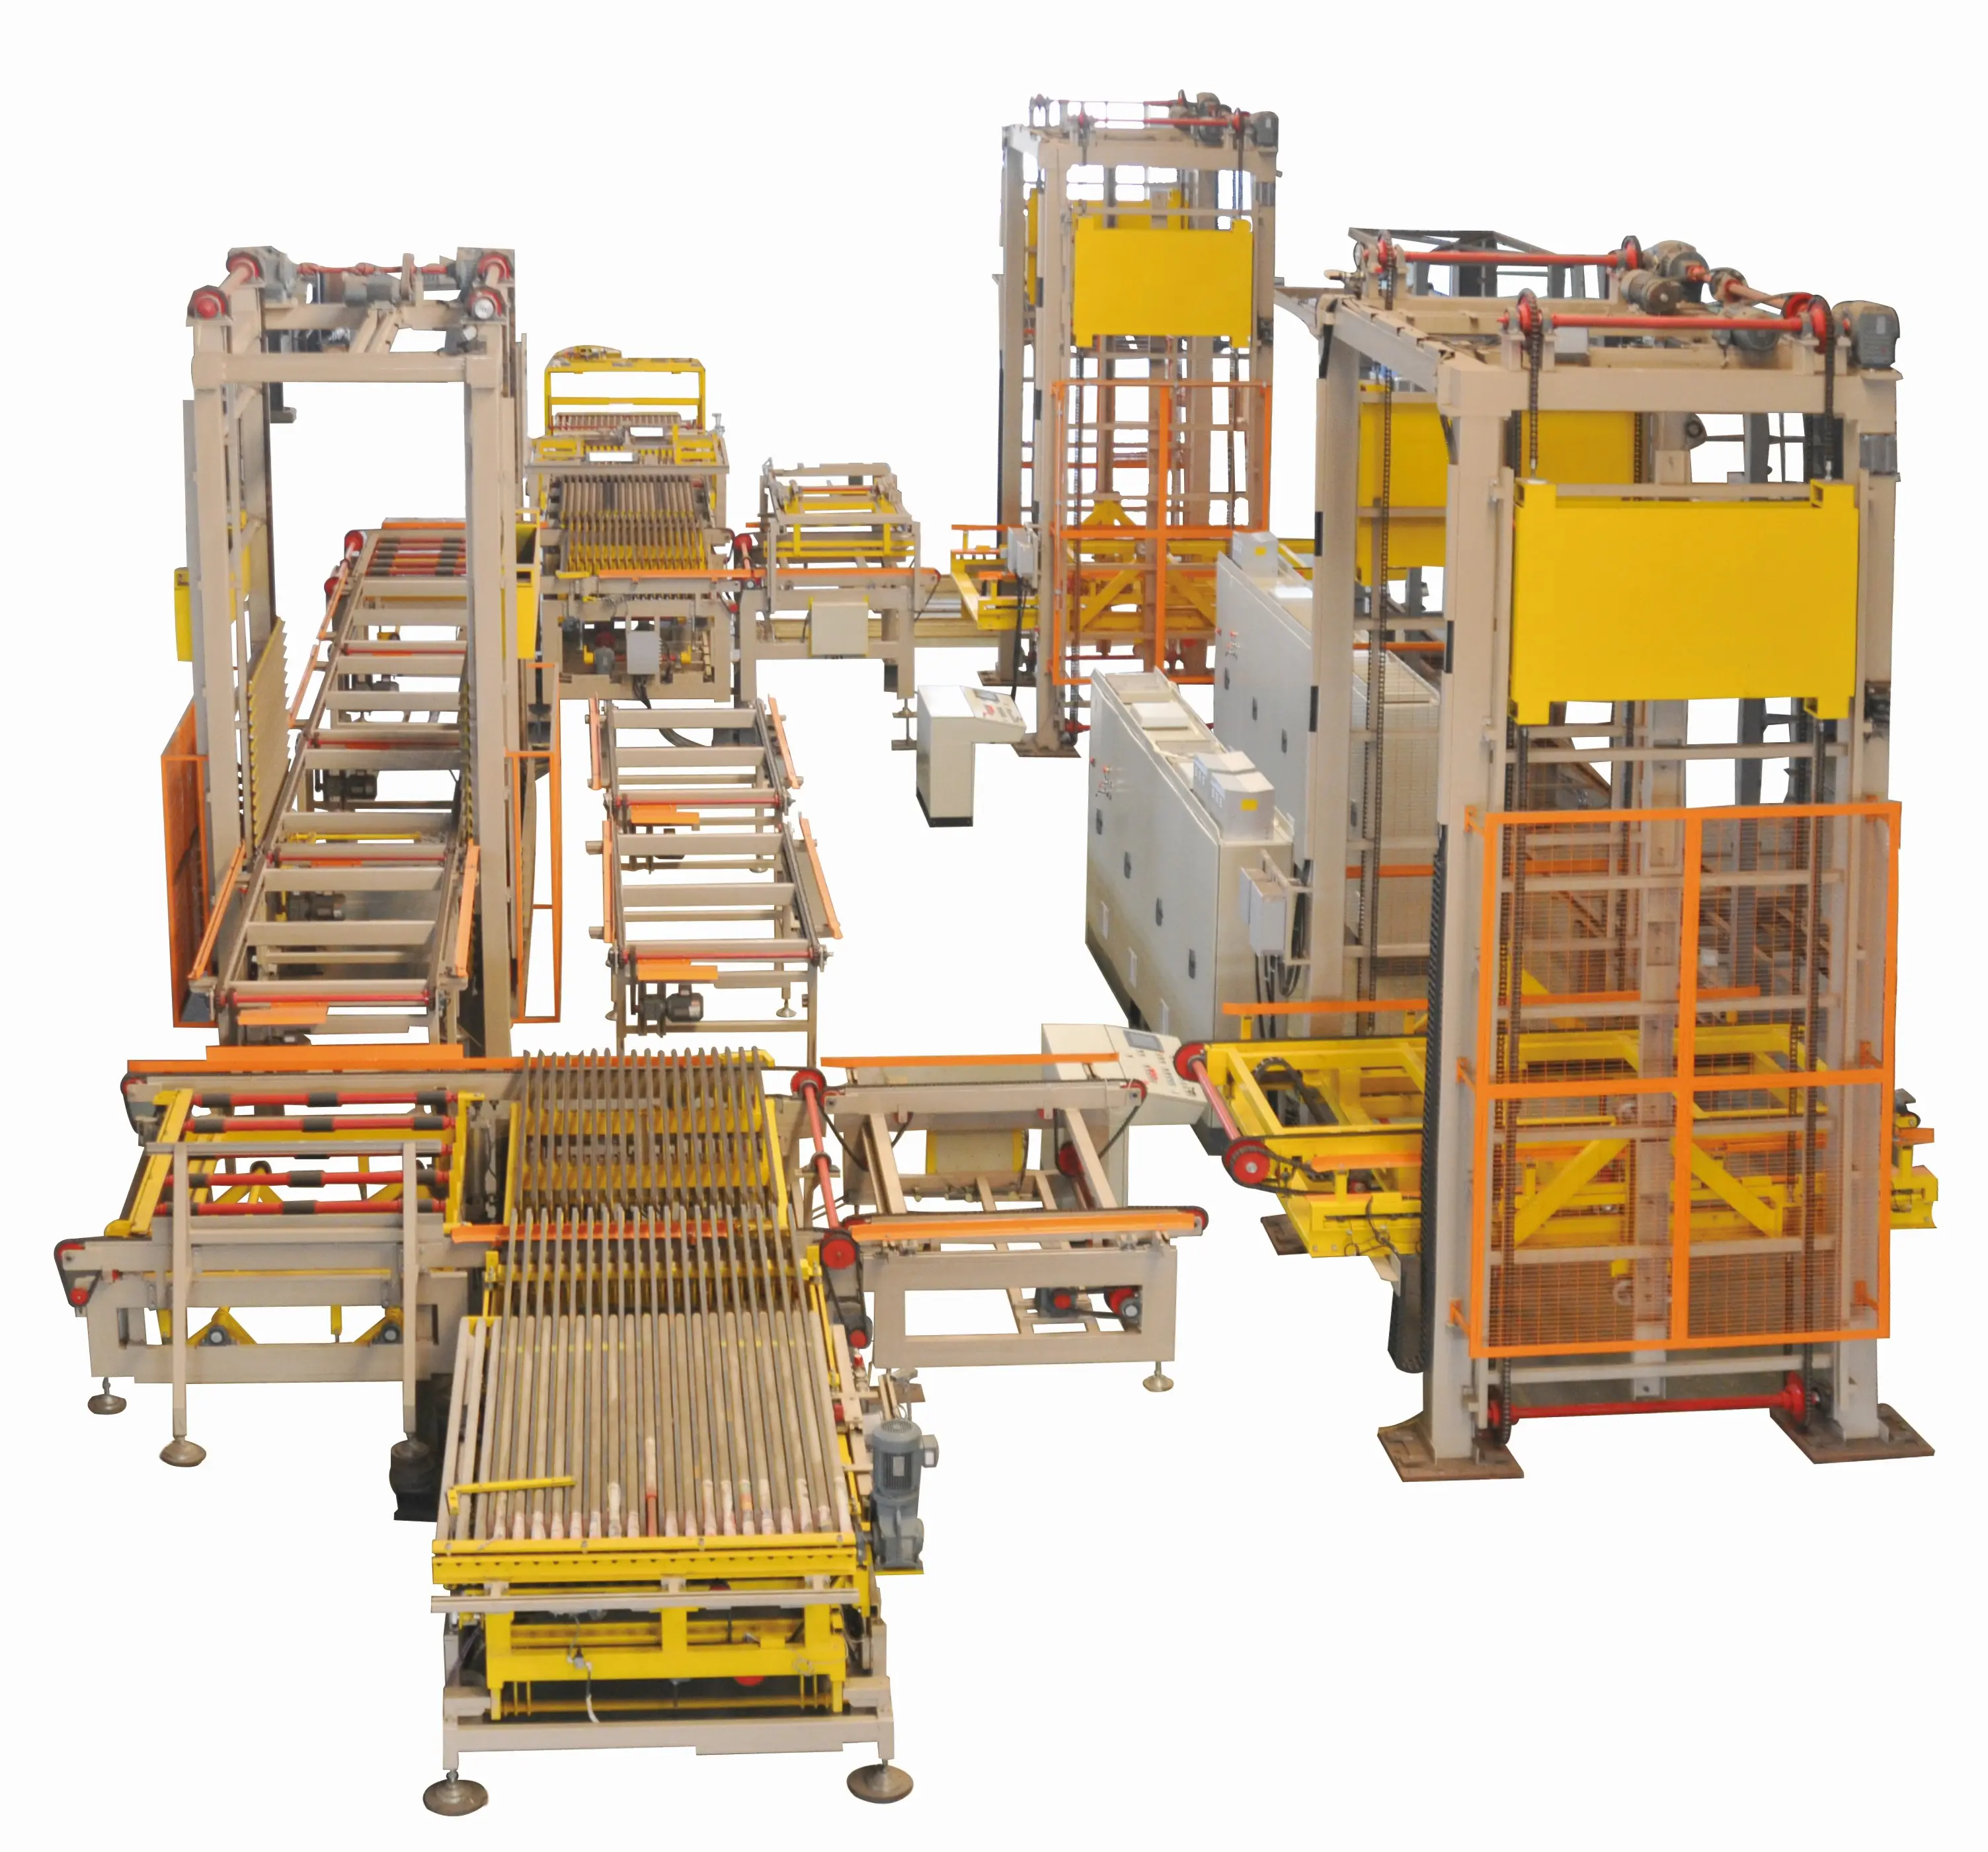 Loading and unloading brick machinery system of drying pallets